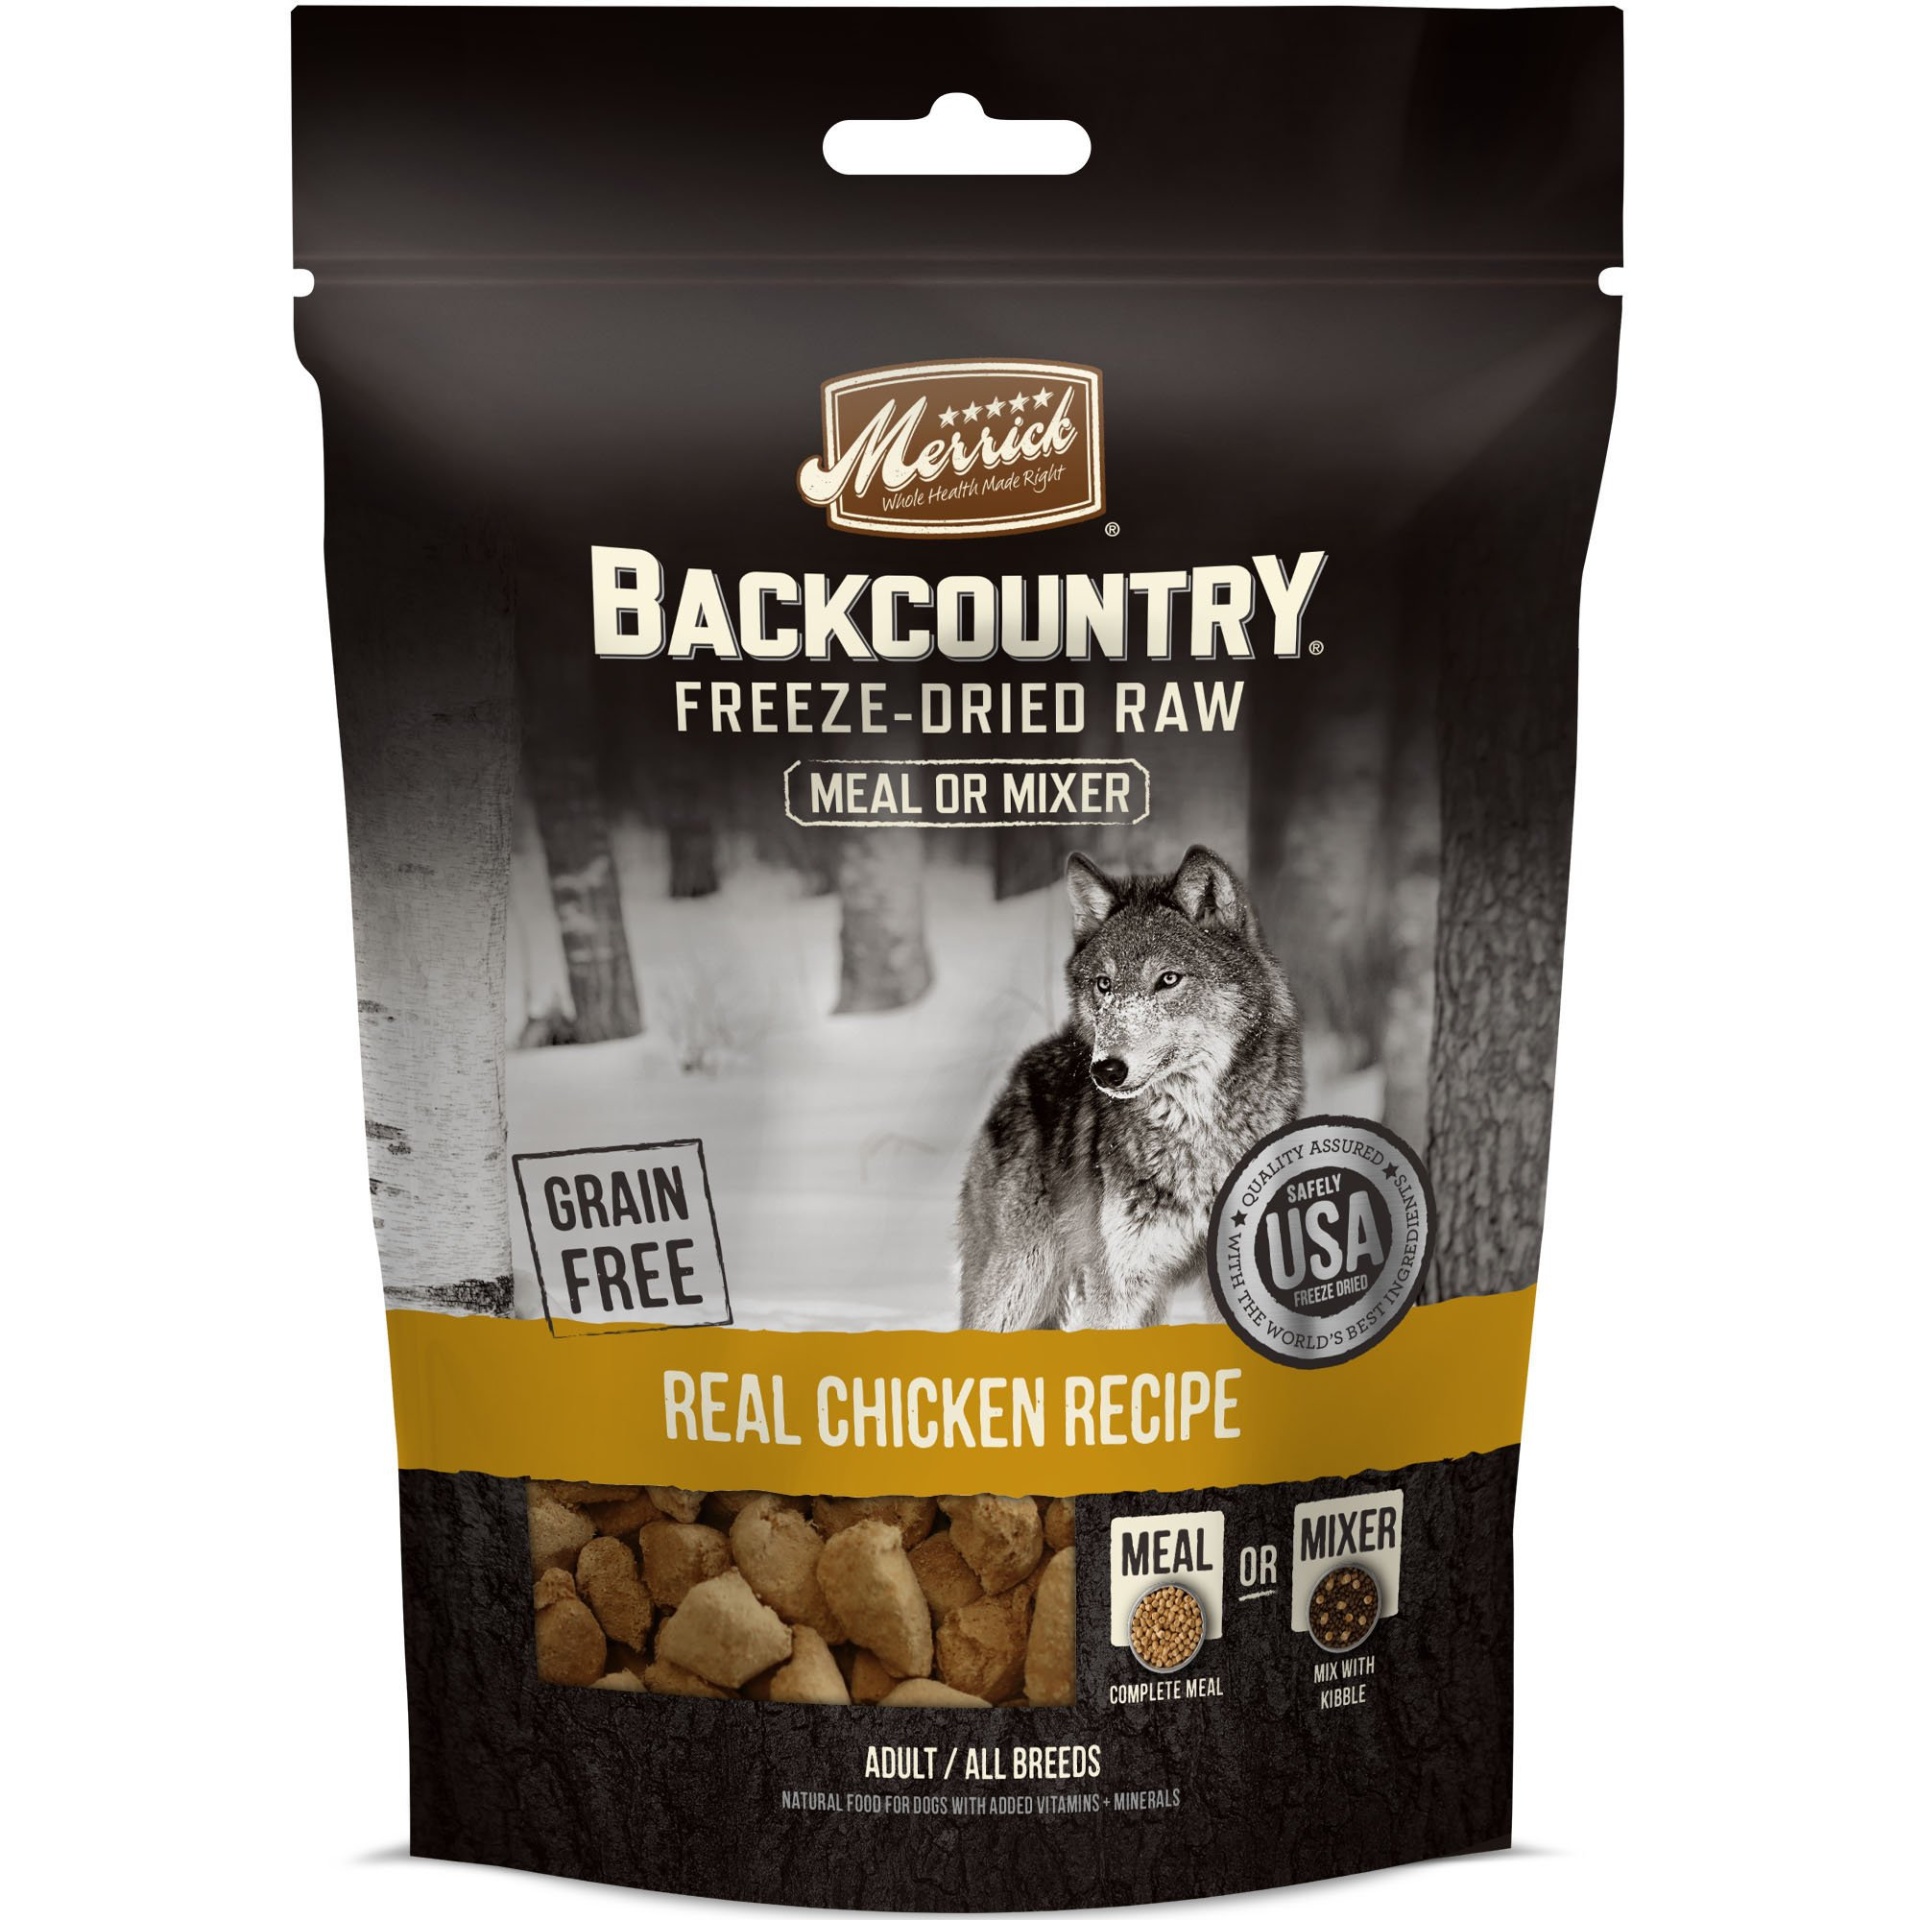 slide 1 of 1, Merrick Backcountry Freeze-Dried Raw Real Chicken Recipe Meal or Mixer Grain Free Adult Dog Food, 12.5 oz